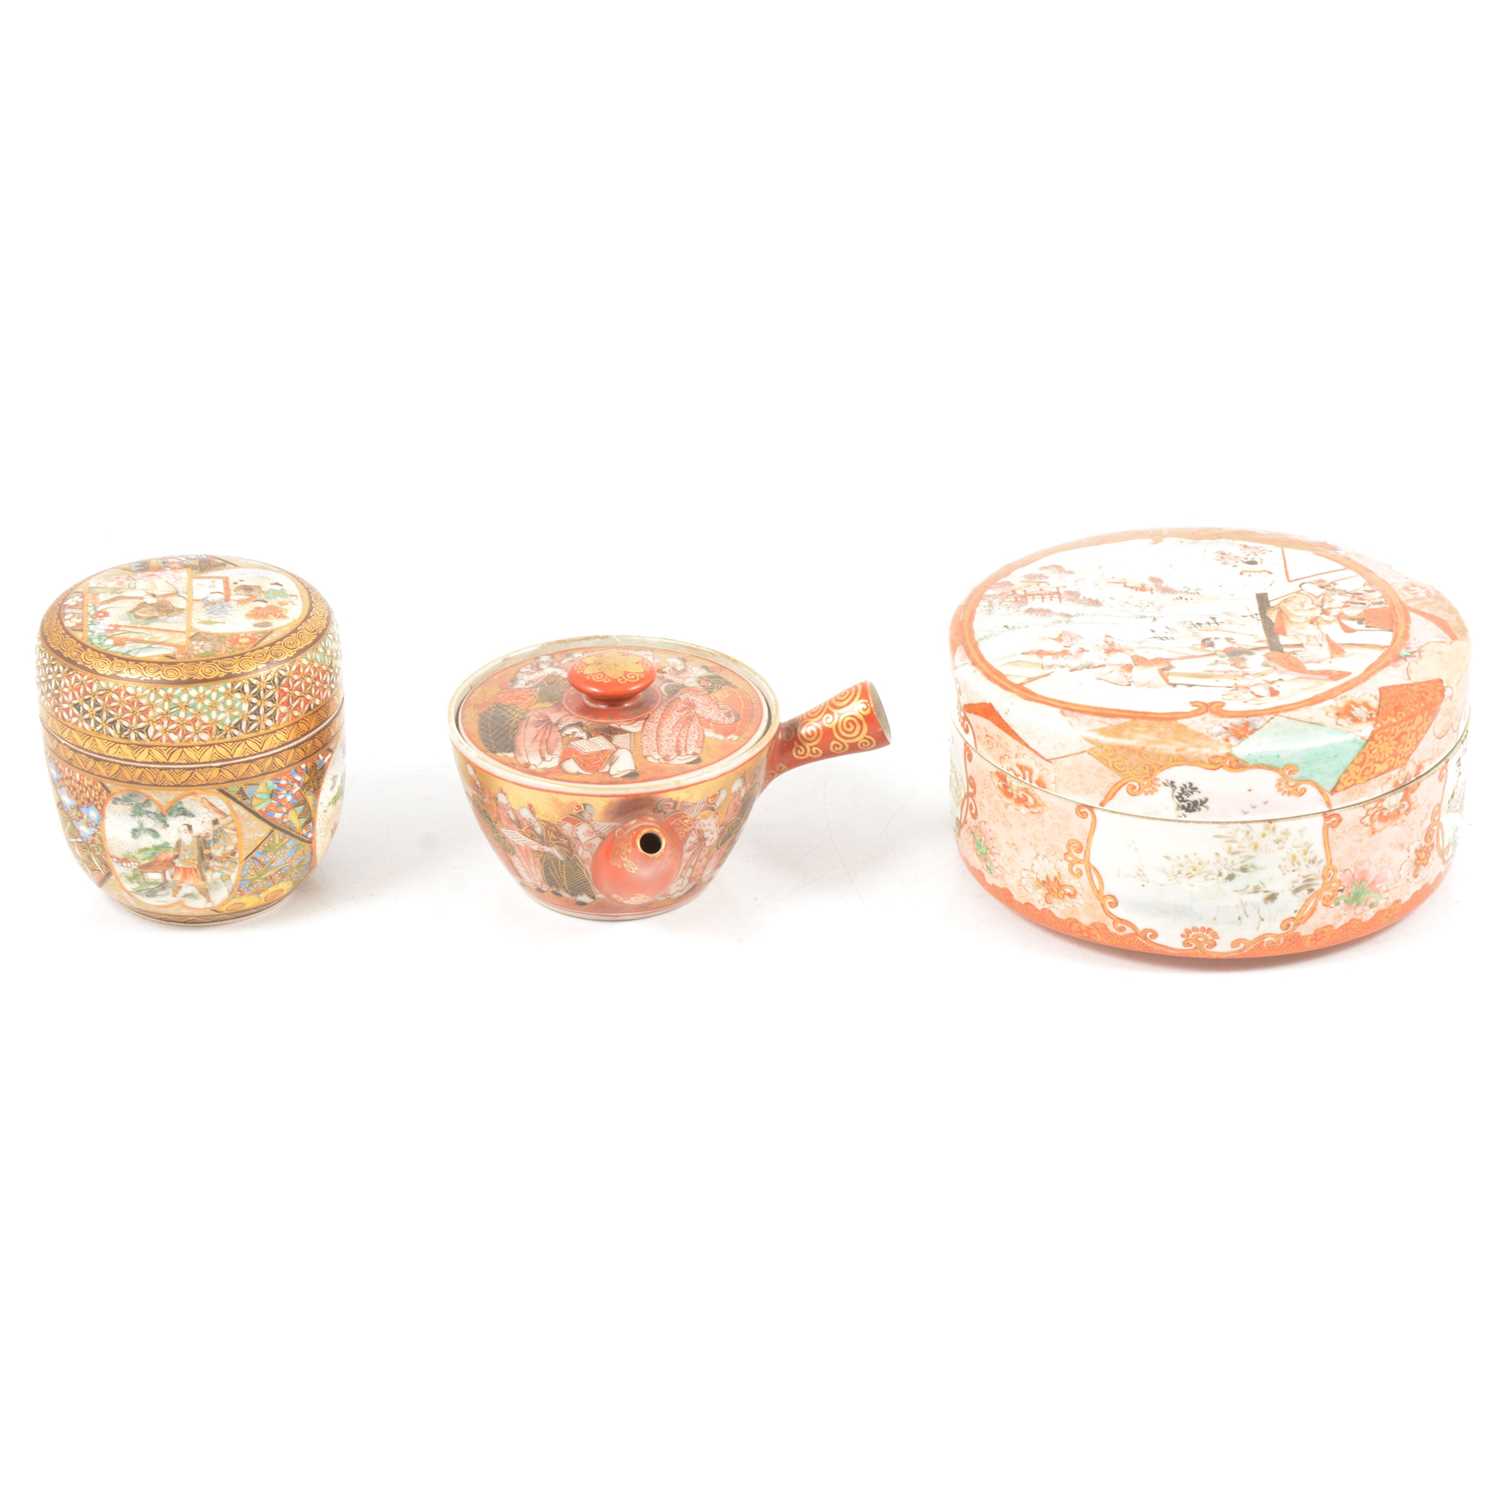 Lot 7 - Two Japanese Satsuma covered bowls and a miniature teapot